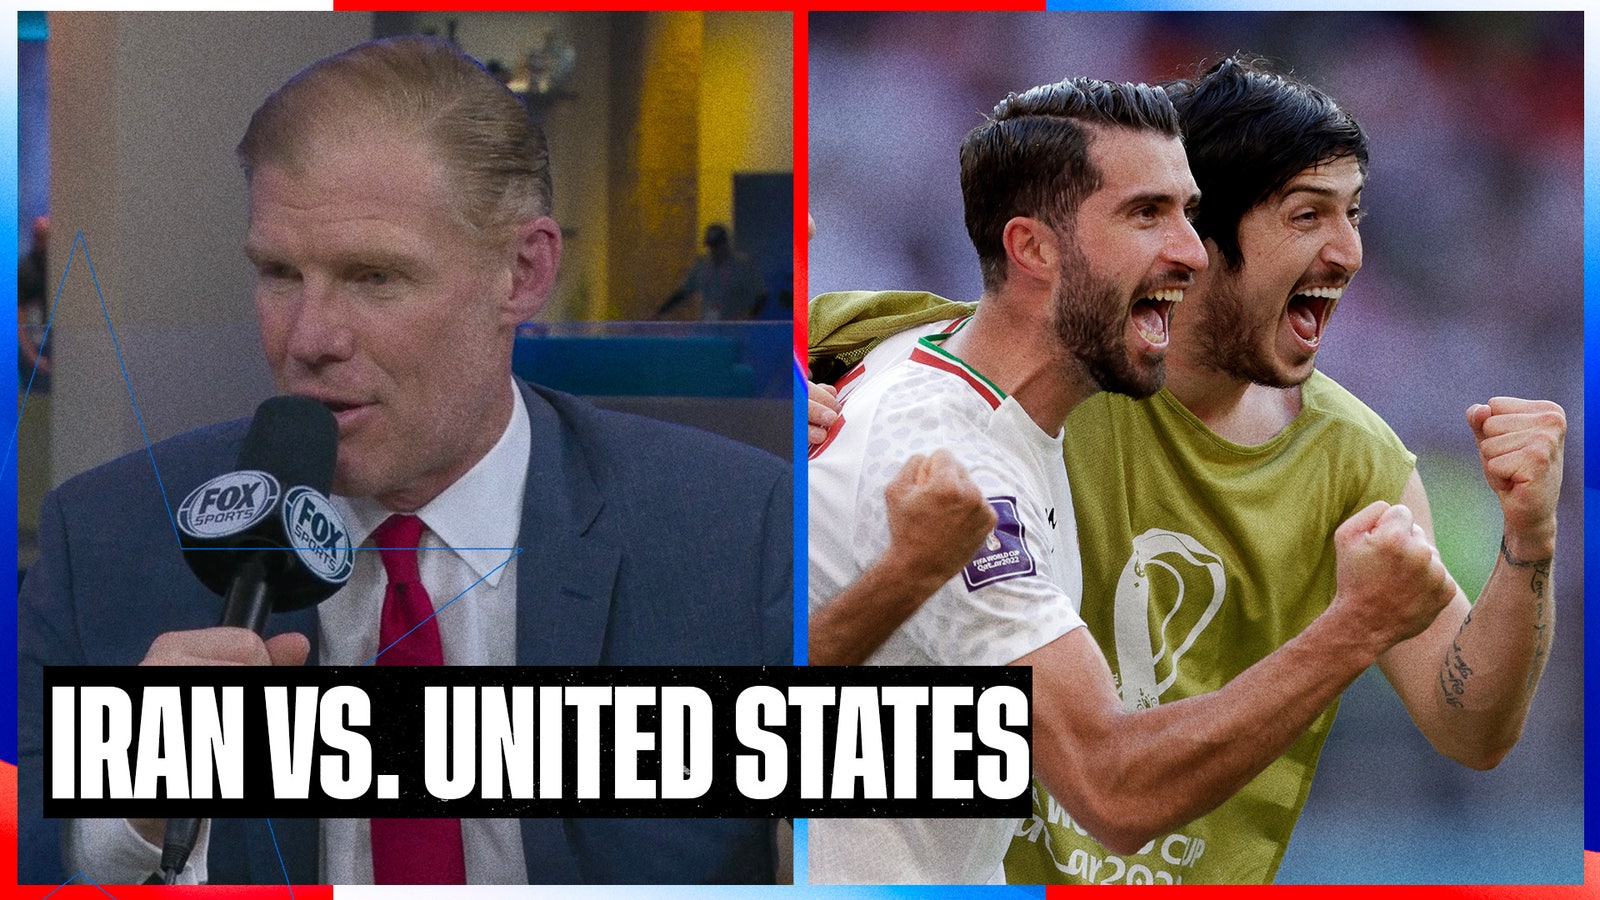 Should U.S. be worried about Iran matchup?